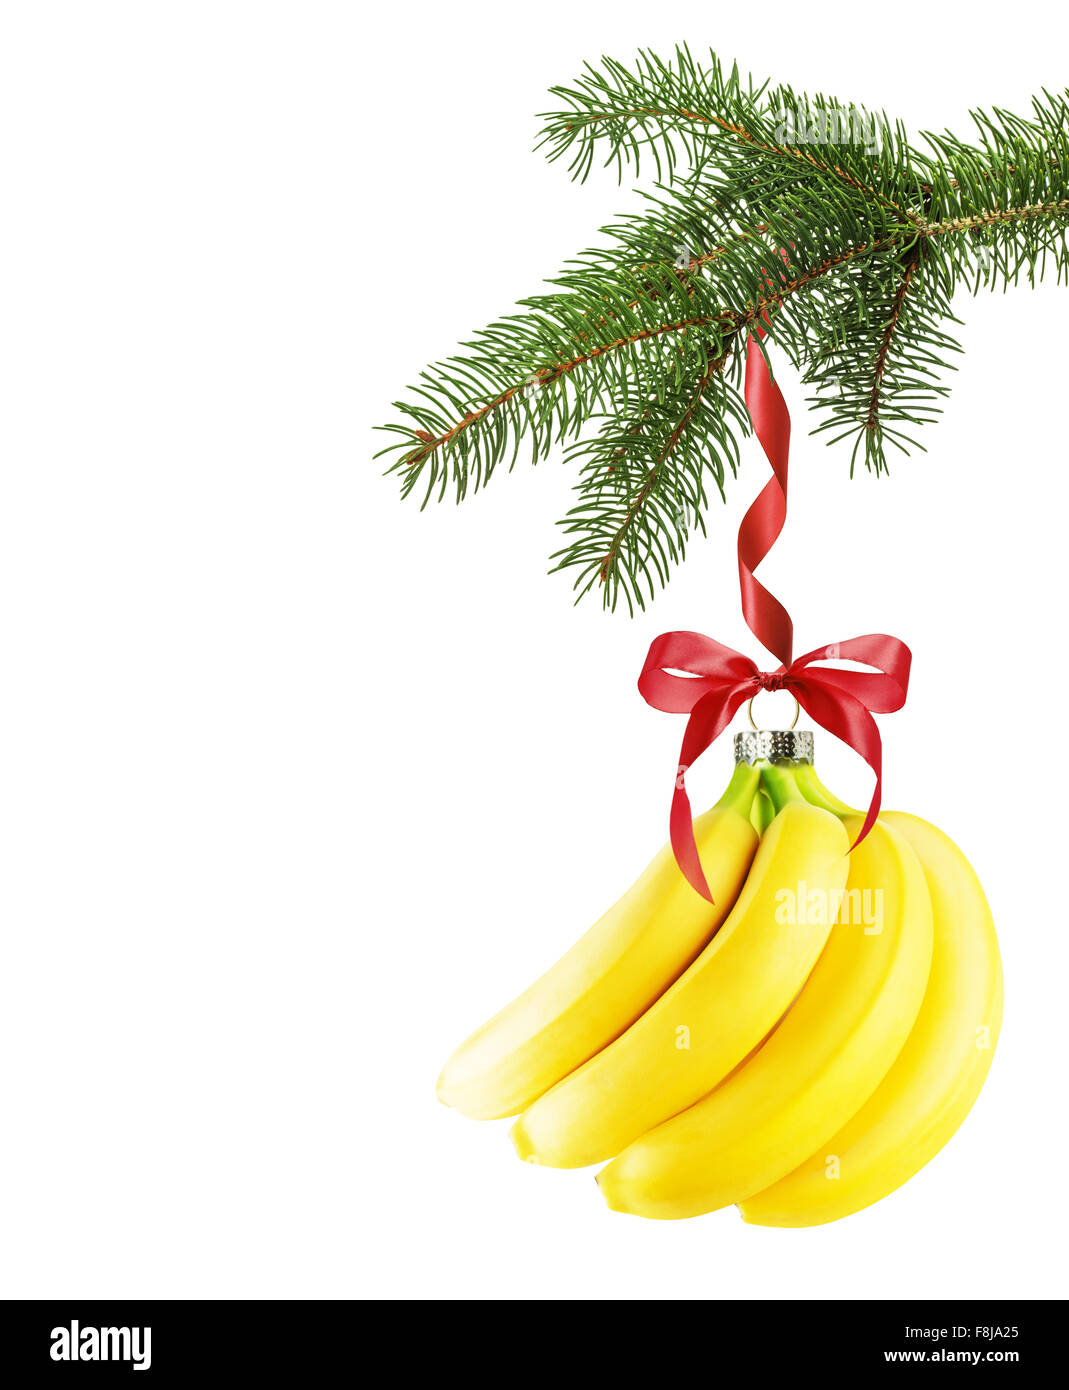 Christmas tree branch with Christmas ball in shape of banana isolated on the white background. Stock Photo